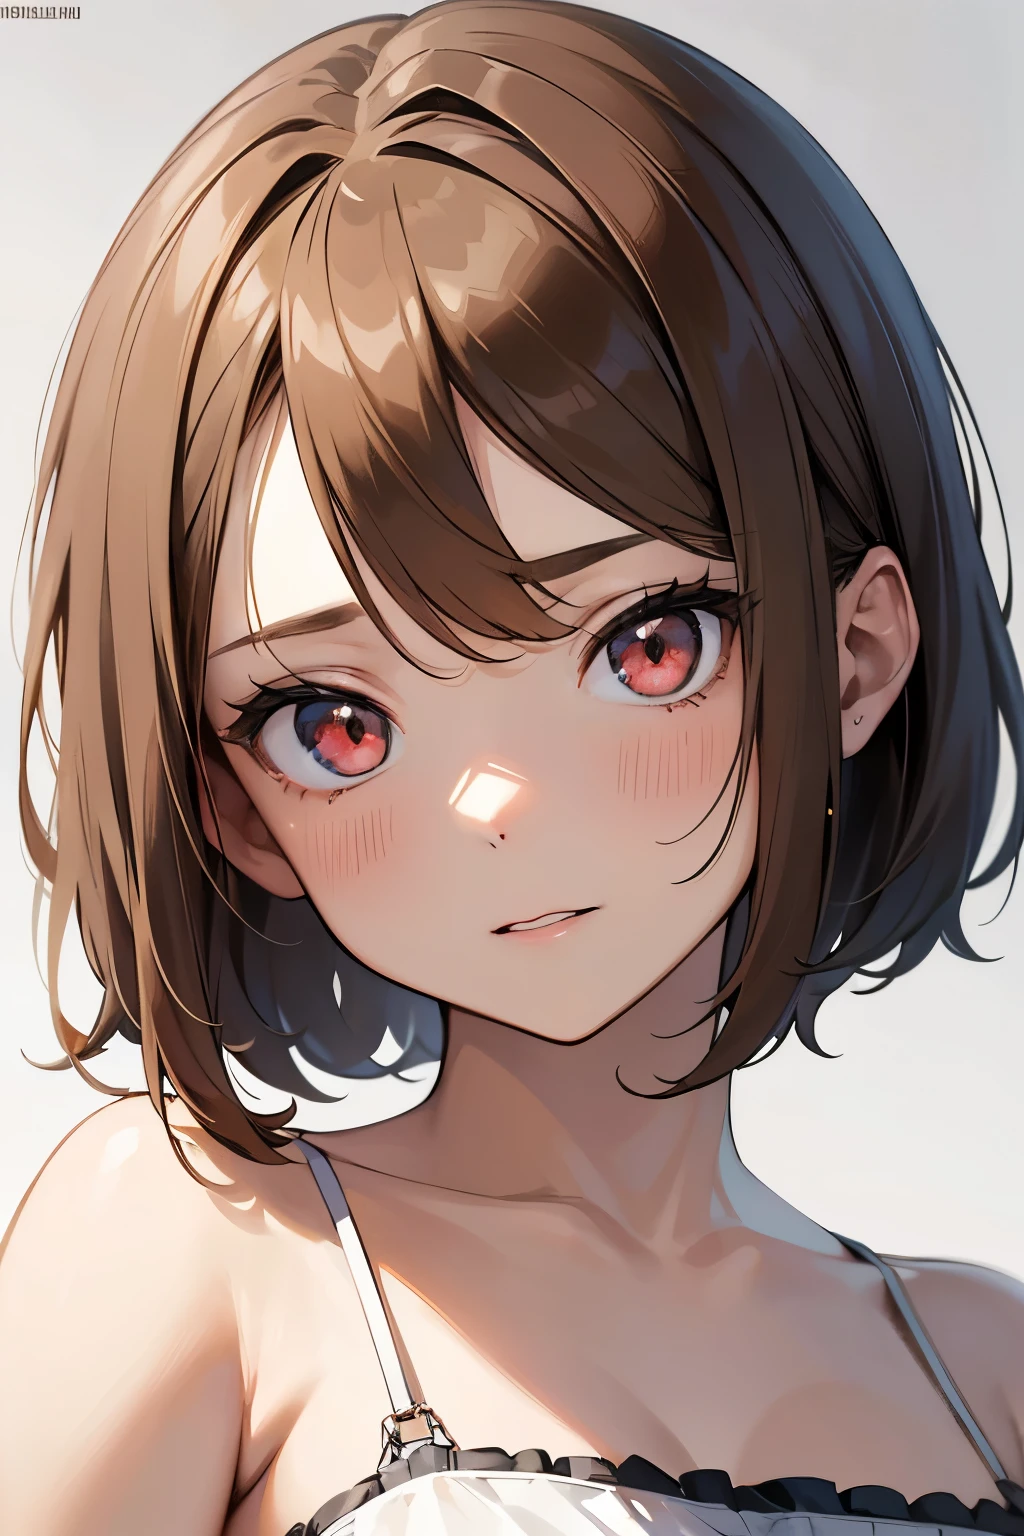 1 girl, , UHigh resolution, retina, masterpiece, Accurate, Anatomically correct, Rough skin, Very detailed, Advanced Details, high quality, Awards, 最high quality, High resolution, High resolution, 4K,(anime,8k,masterpiece, 最high quality, 最high quality,beautifully、aesthetic:1.2,Professional Illustration:1.1,Very detailed:1.3,Perfect lighting),Very detailed,Most detailed,Unbelievably absurd,High resolution,Very detaileded,Complex:1.6, Cute pose，young，③red eyes,detailed face, fine eyes, Skin details，④: animation, figure, 
⑤: (parted bangs: 1.5)，diagonal bang ，very short hair，(Light brown hair:1.2)，⑦: (head shot:1.5), looking at the viewer, ⑧: Camisole blouse，